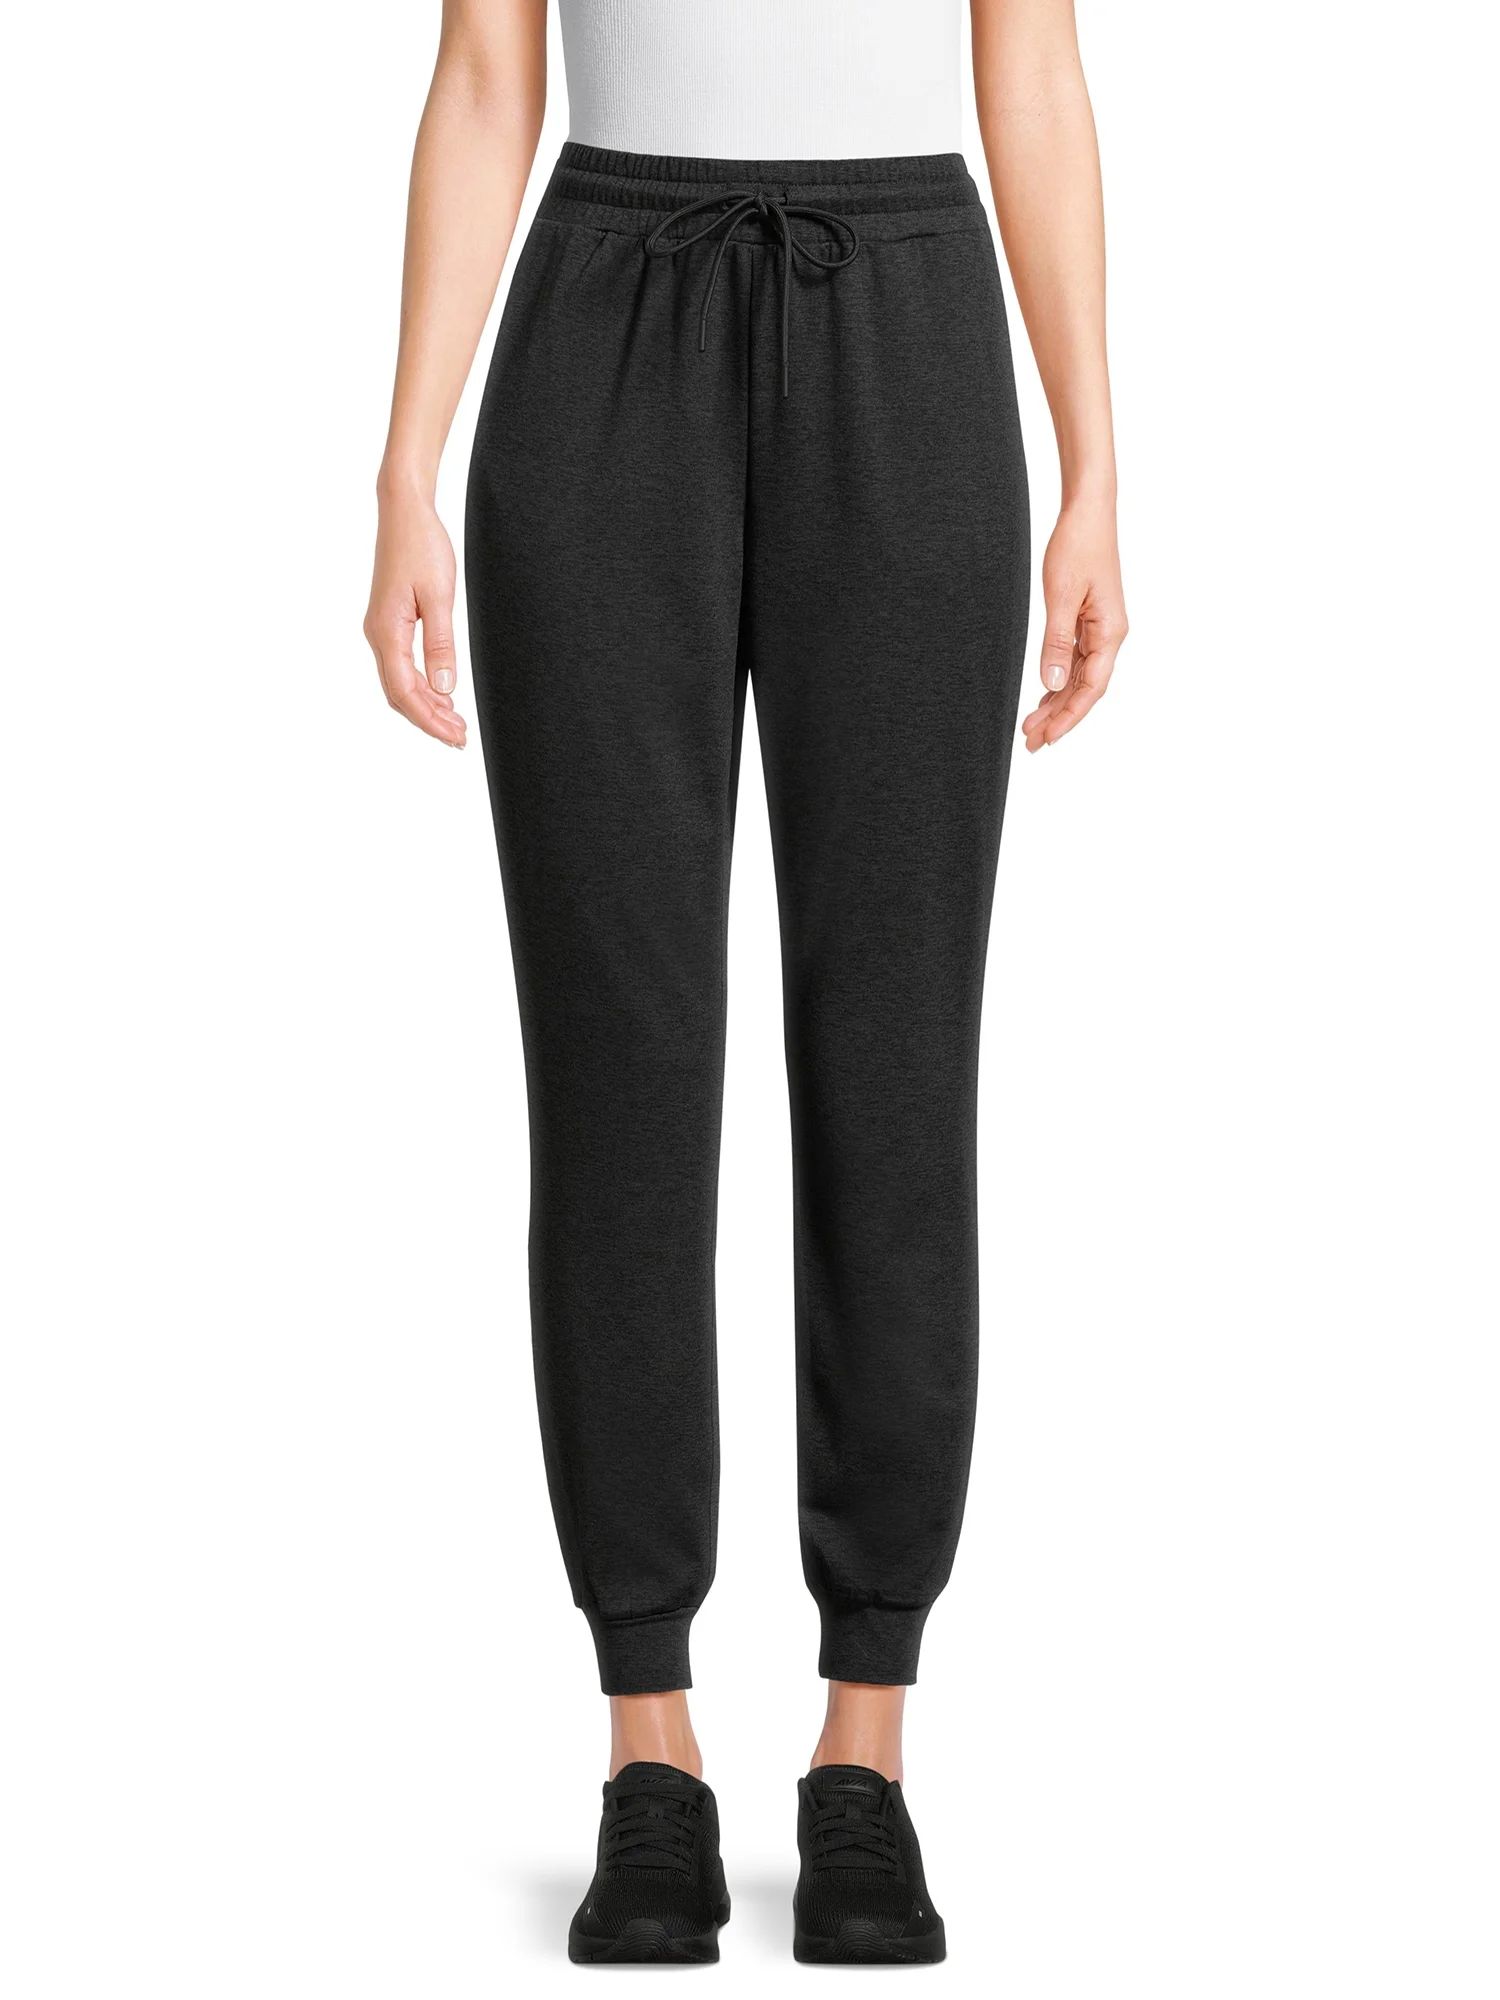 Athletic Works Women's and Women's Plus Buttery Soft Lightweight Joggers, Sizes XS-4X | Walmart (US)